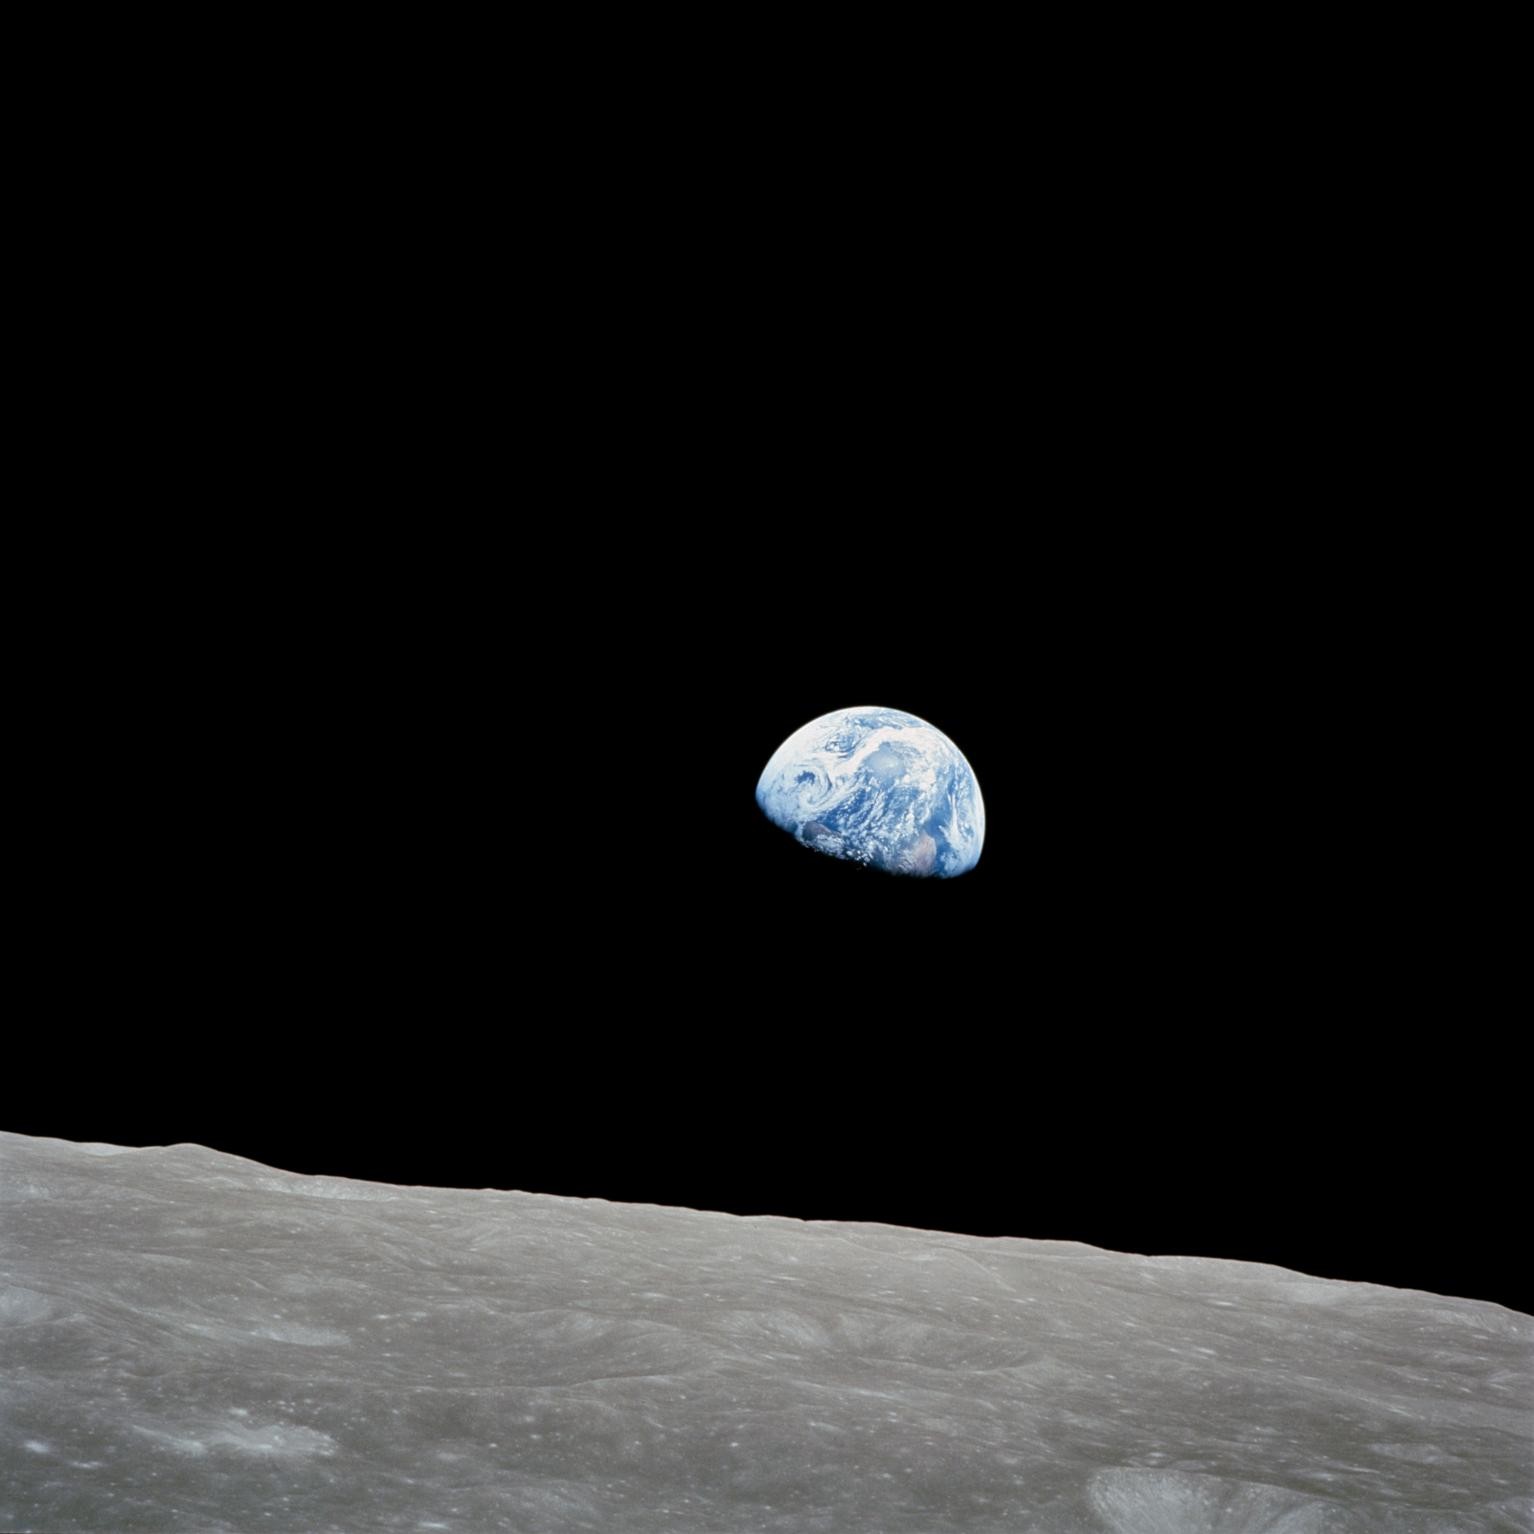 Earthrise photo from Apollo 8 Mission